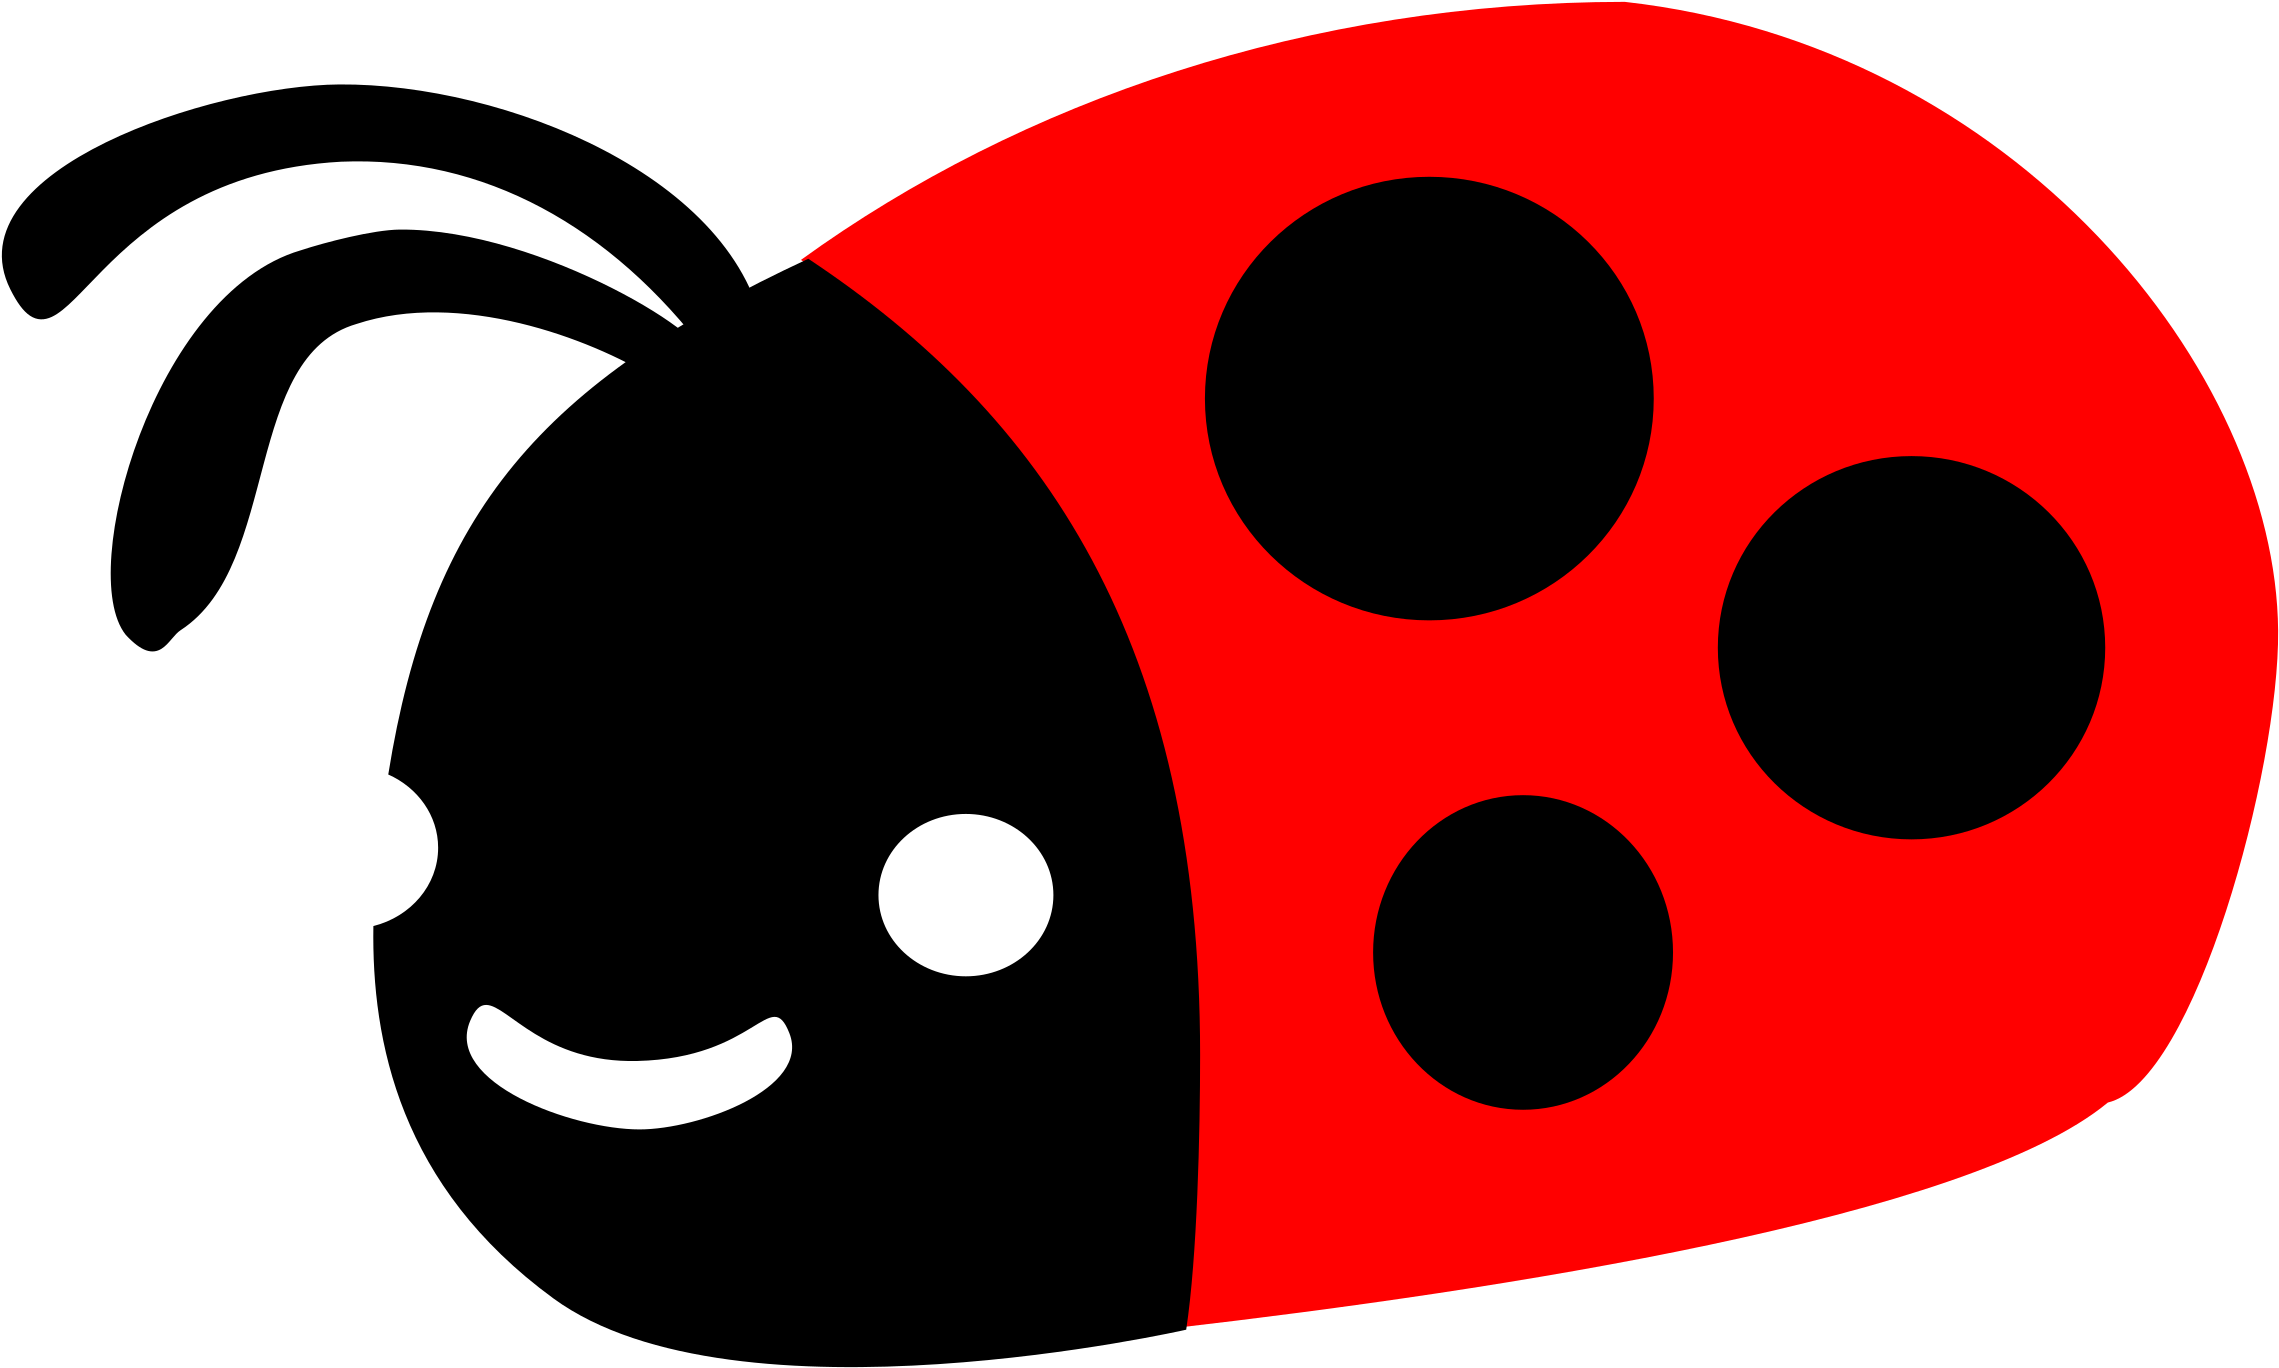 This Free Icons Png Design Of Cute Ladybug